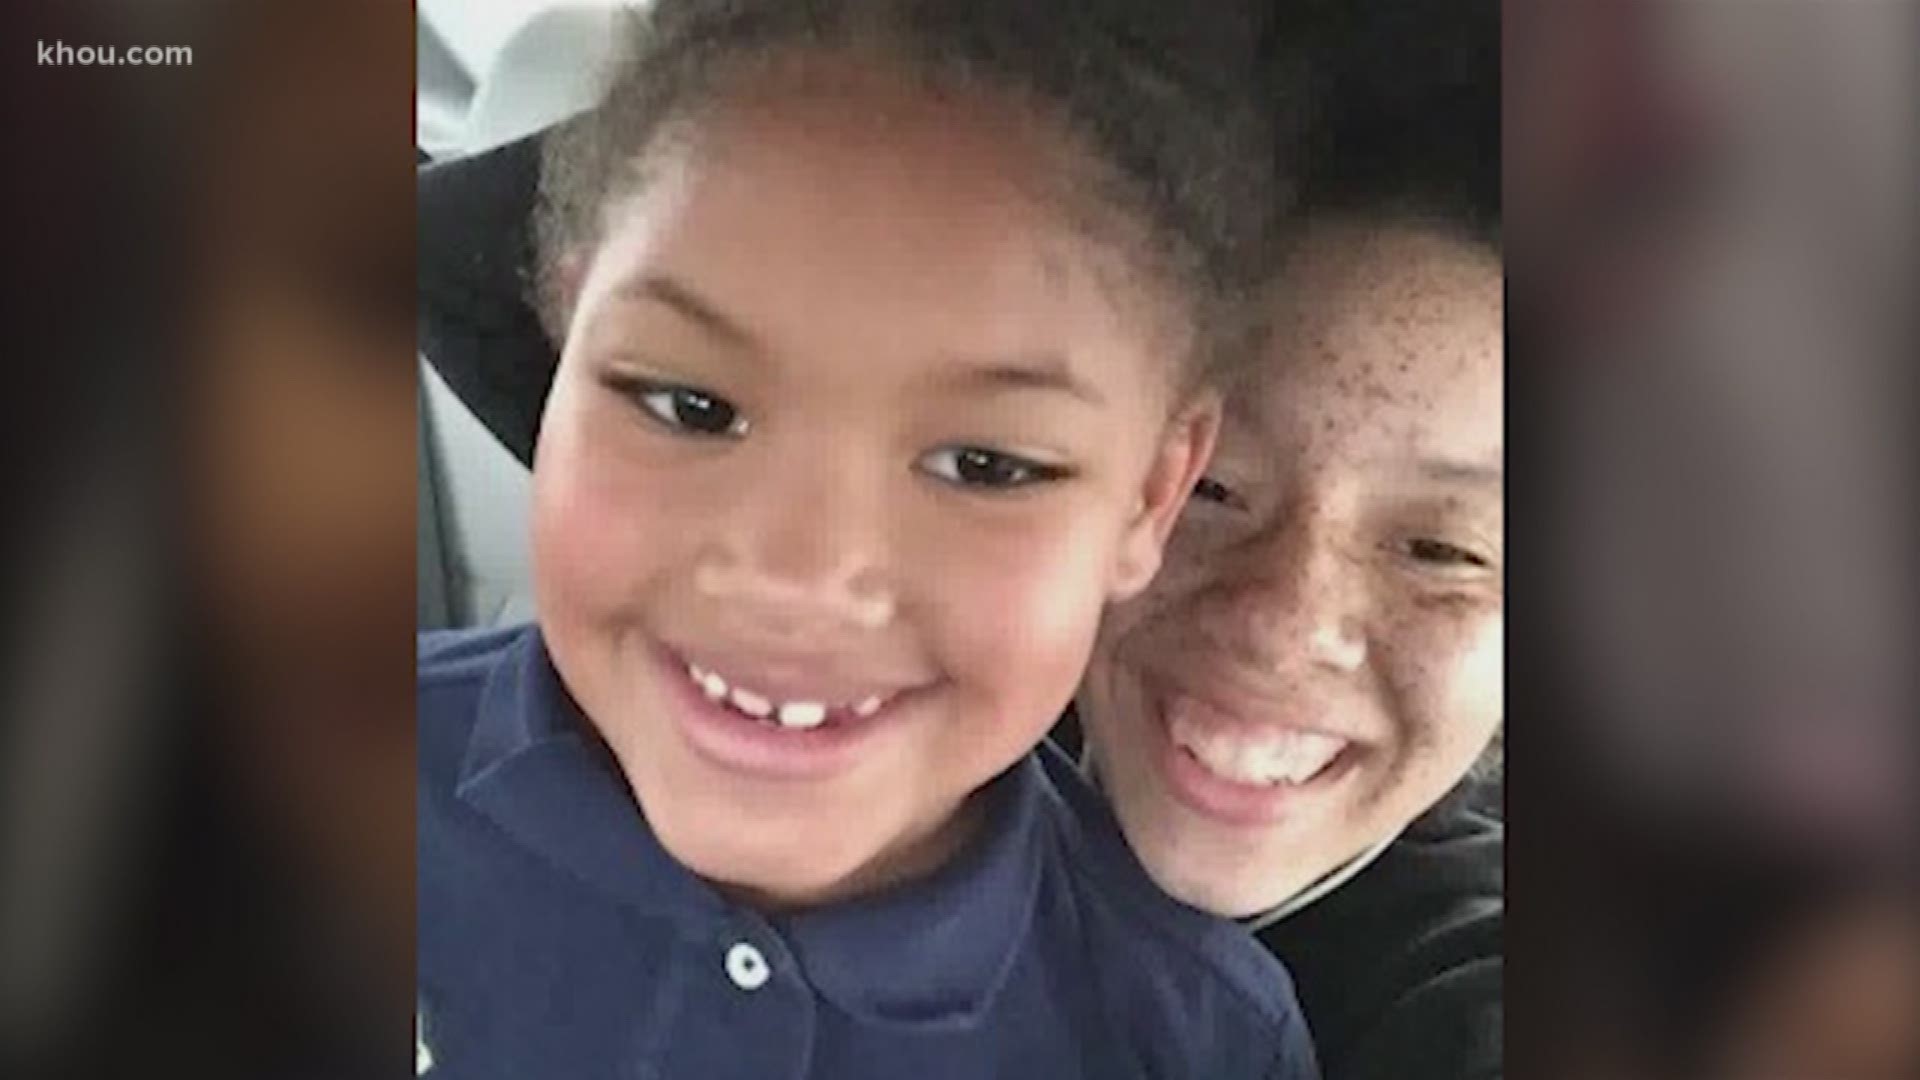 The Harris County Sheriff's Office says detectives are in the process of interviewing persons of interest in the killing of 7-year-old Jazmine Barnes.